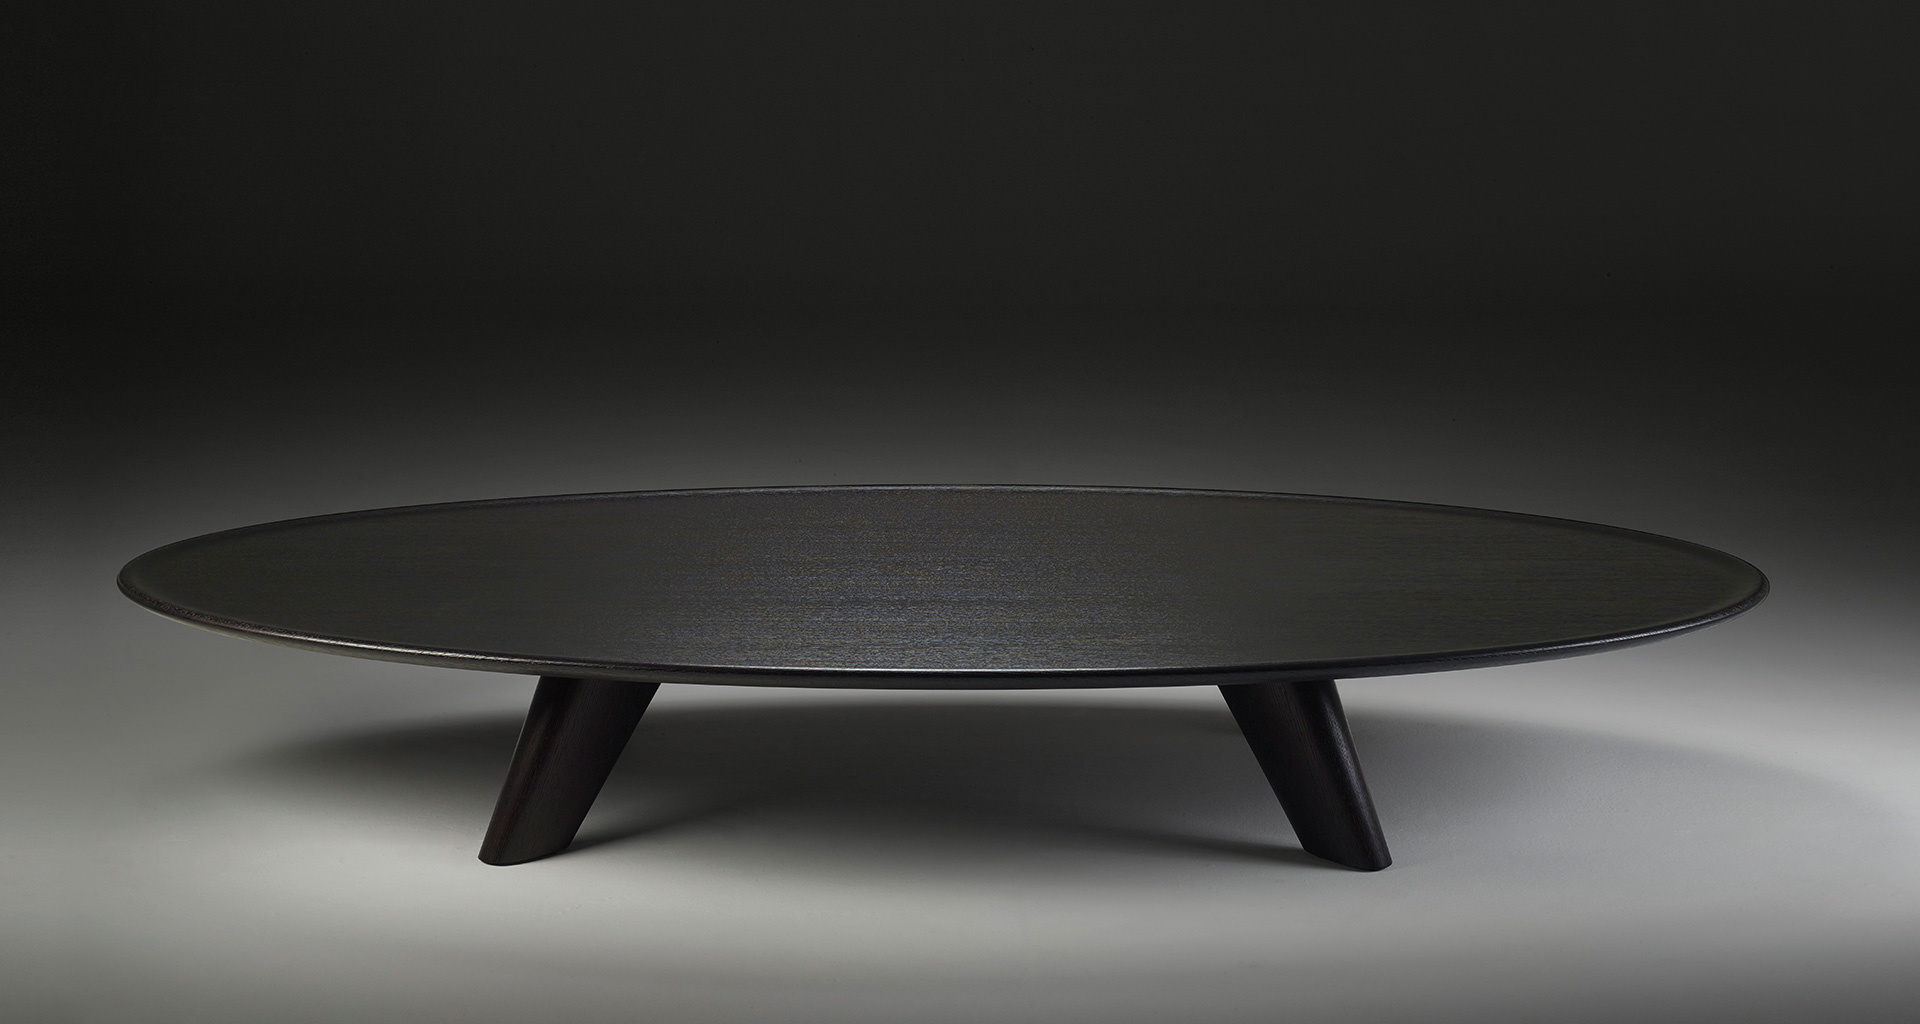 Djennè coffee table that belongs to Indigo Tales, the 2018 Promemoria collection led by indigo color and presented during the Milan Design Week | Promemoria